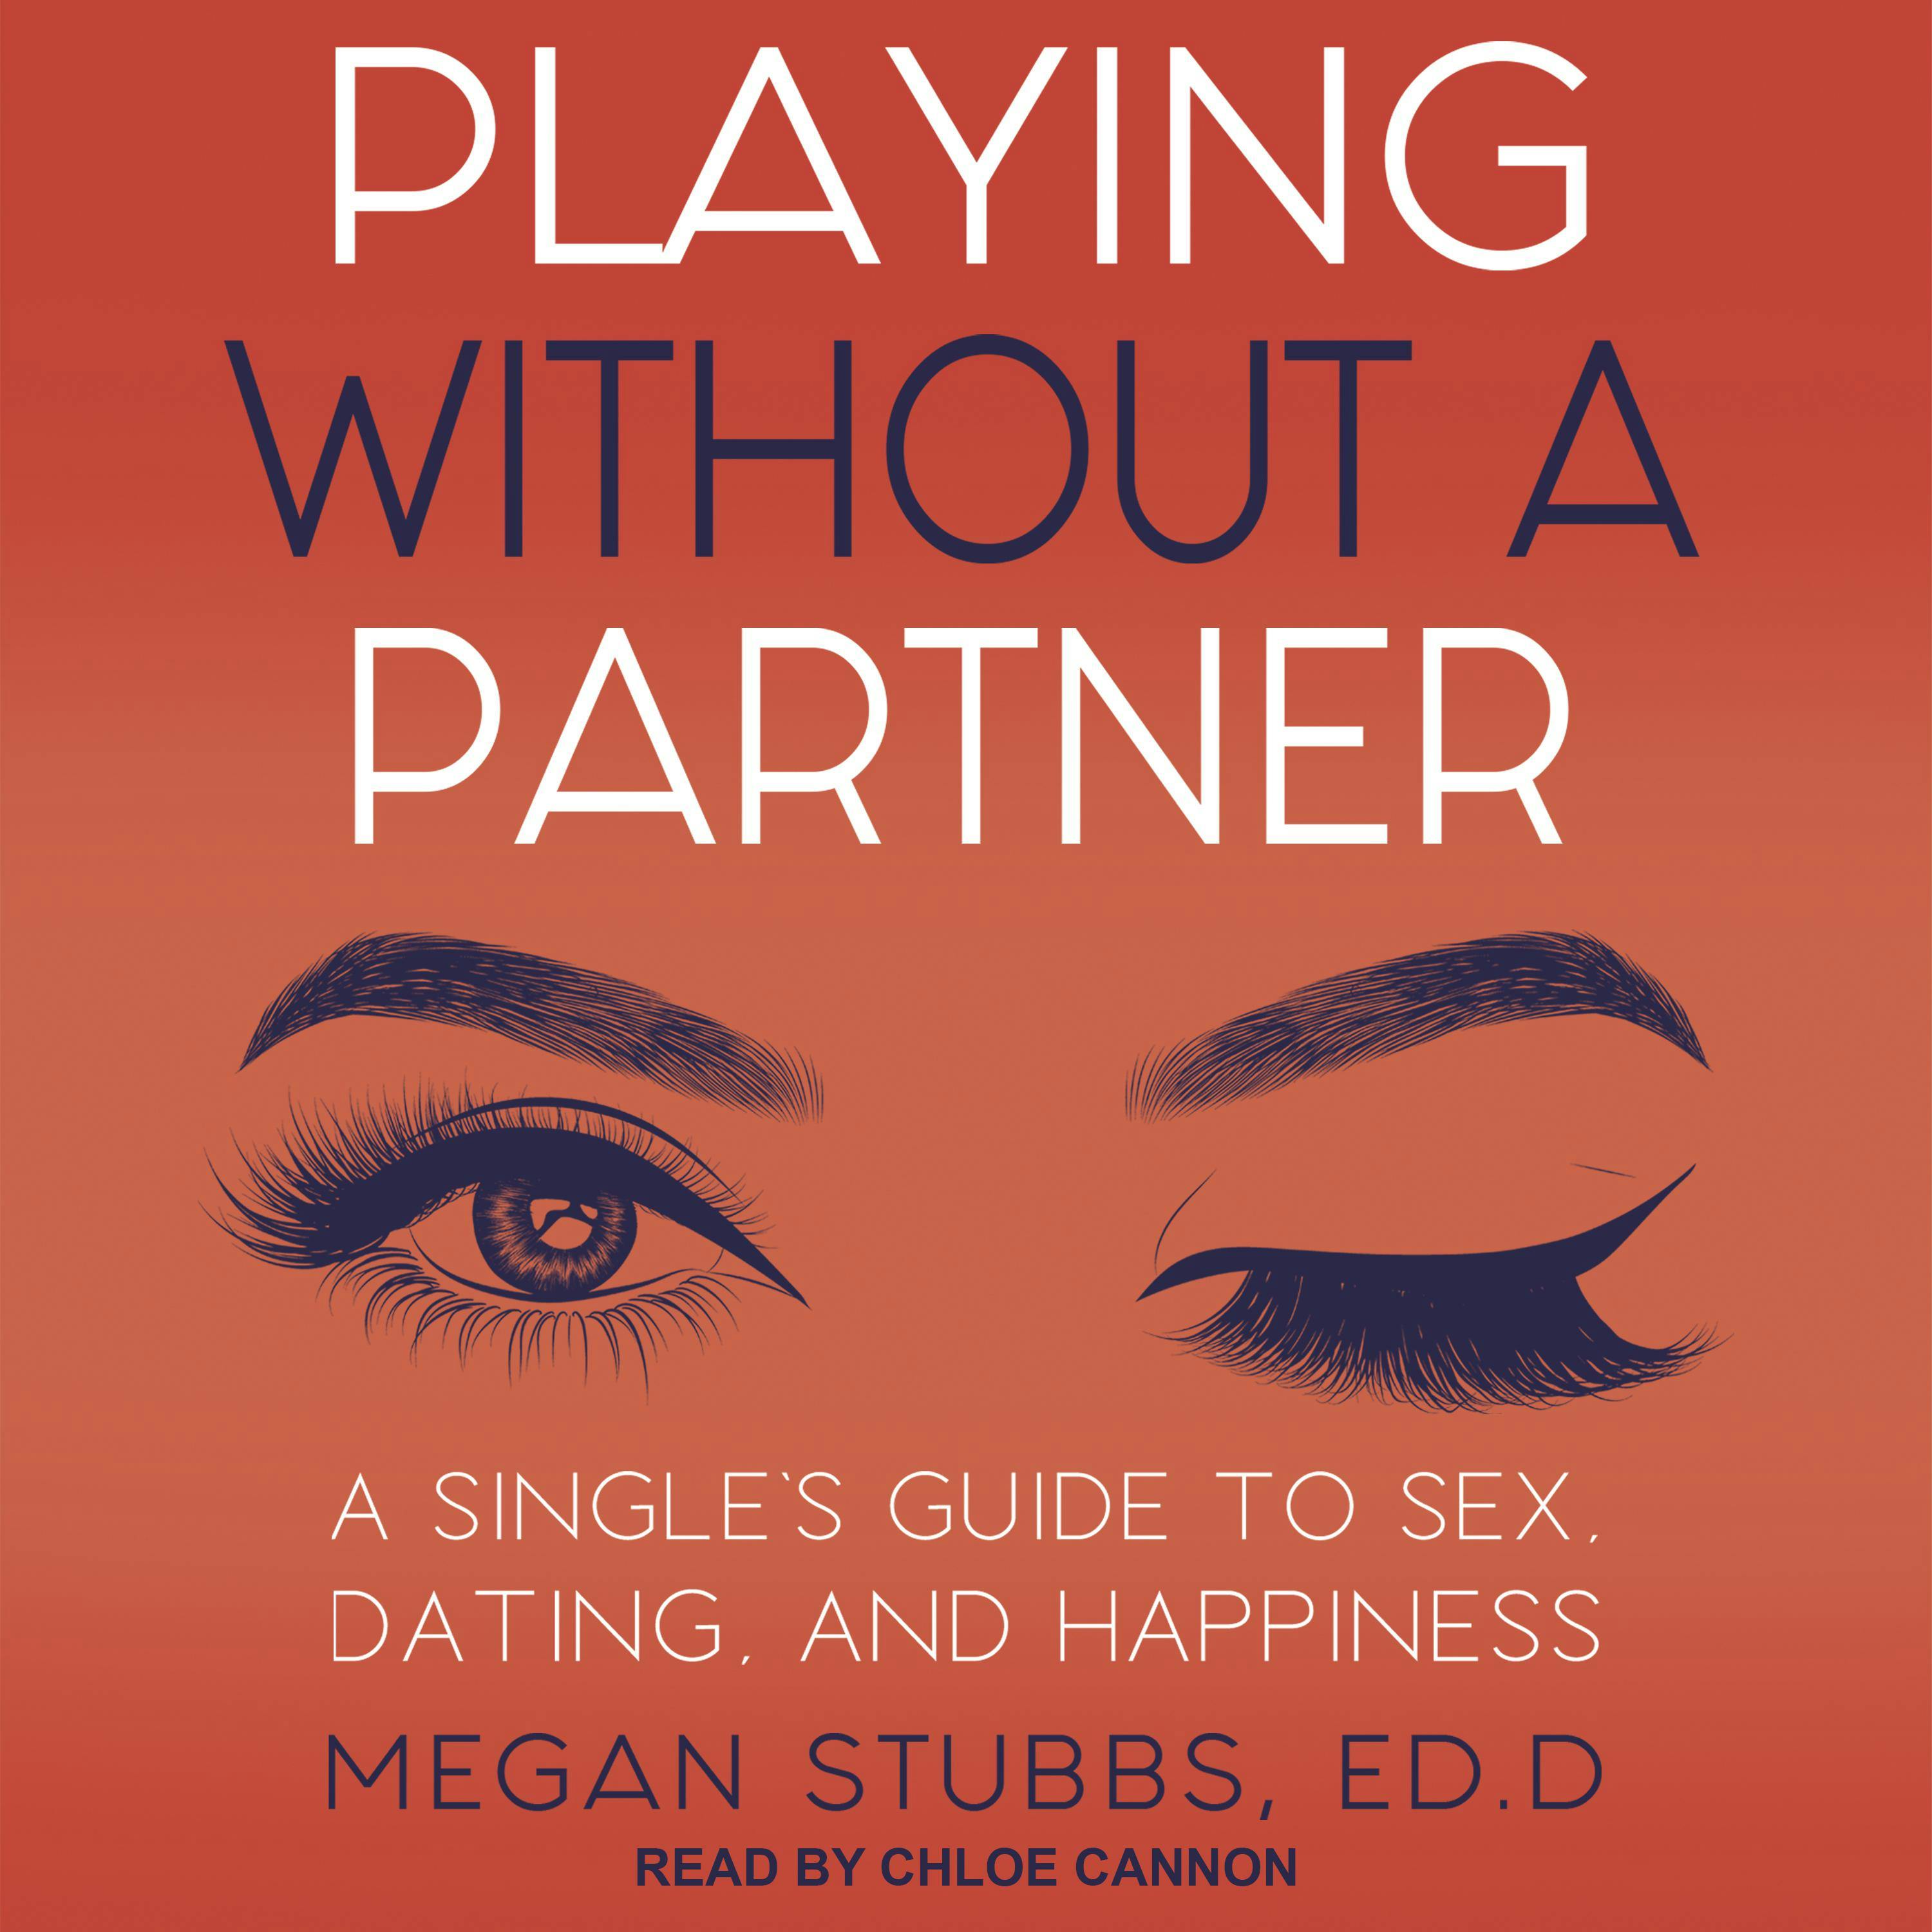 Playing Without a Partner: A Singles' Guide to Sex, Dating, and Happiness - ED.D Megan Stubbs